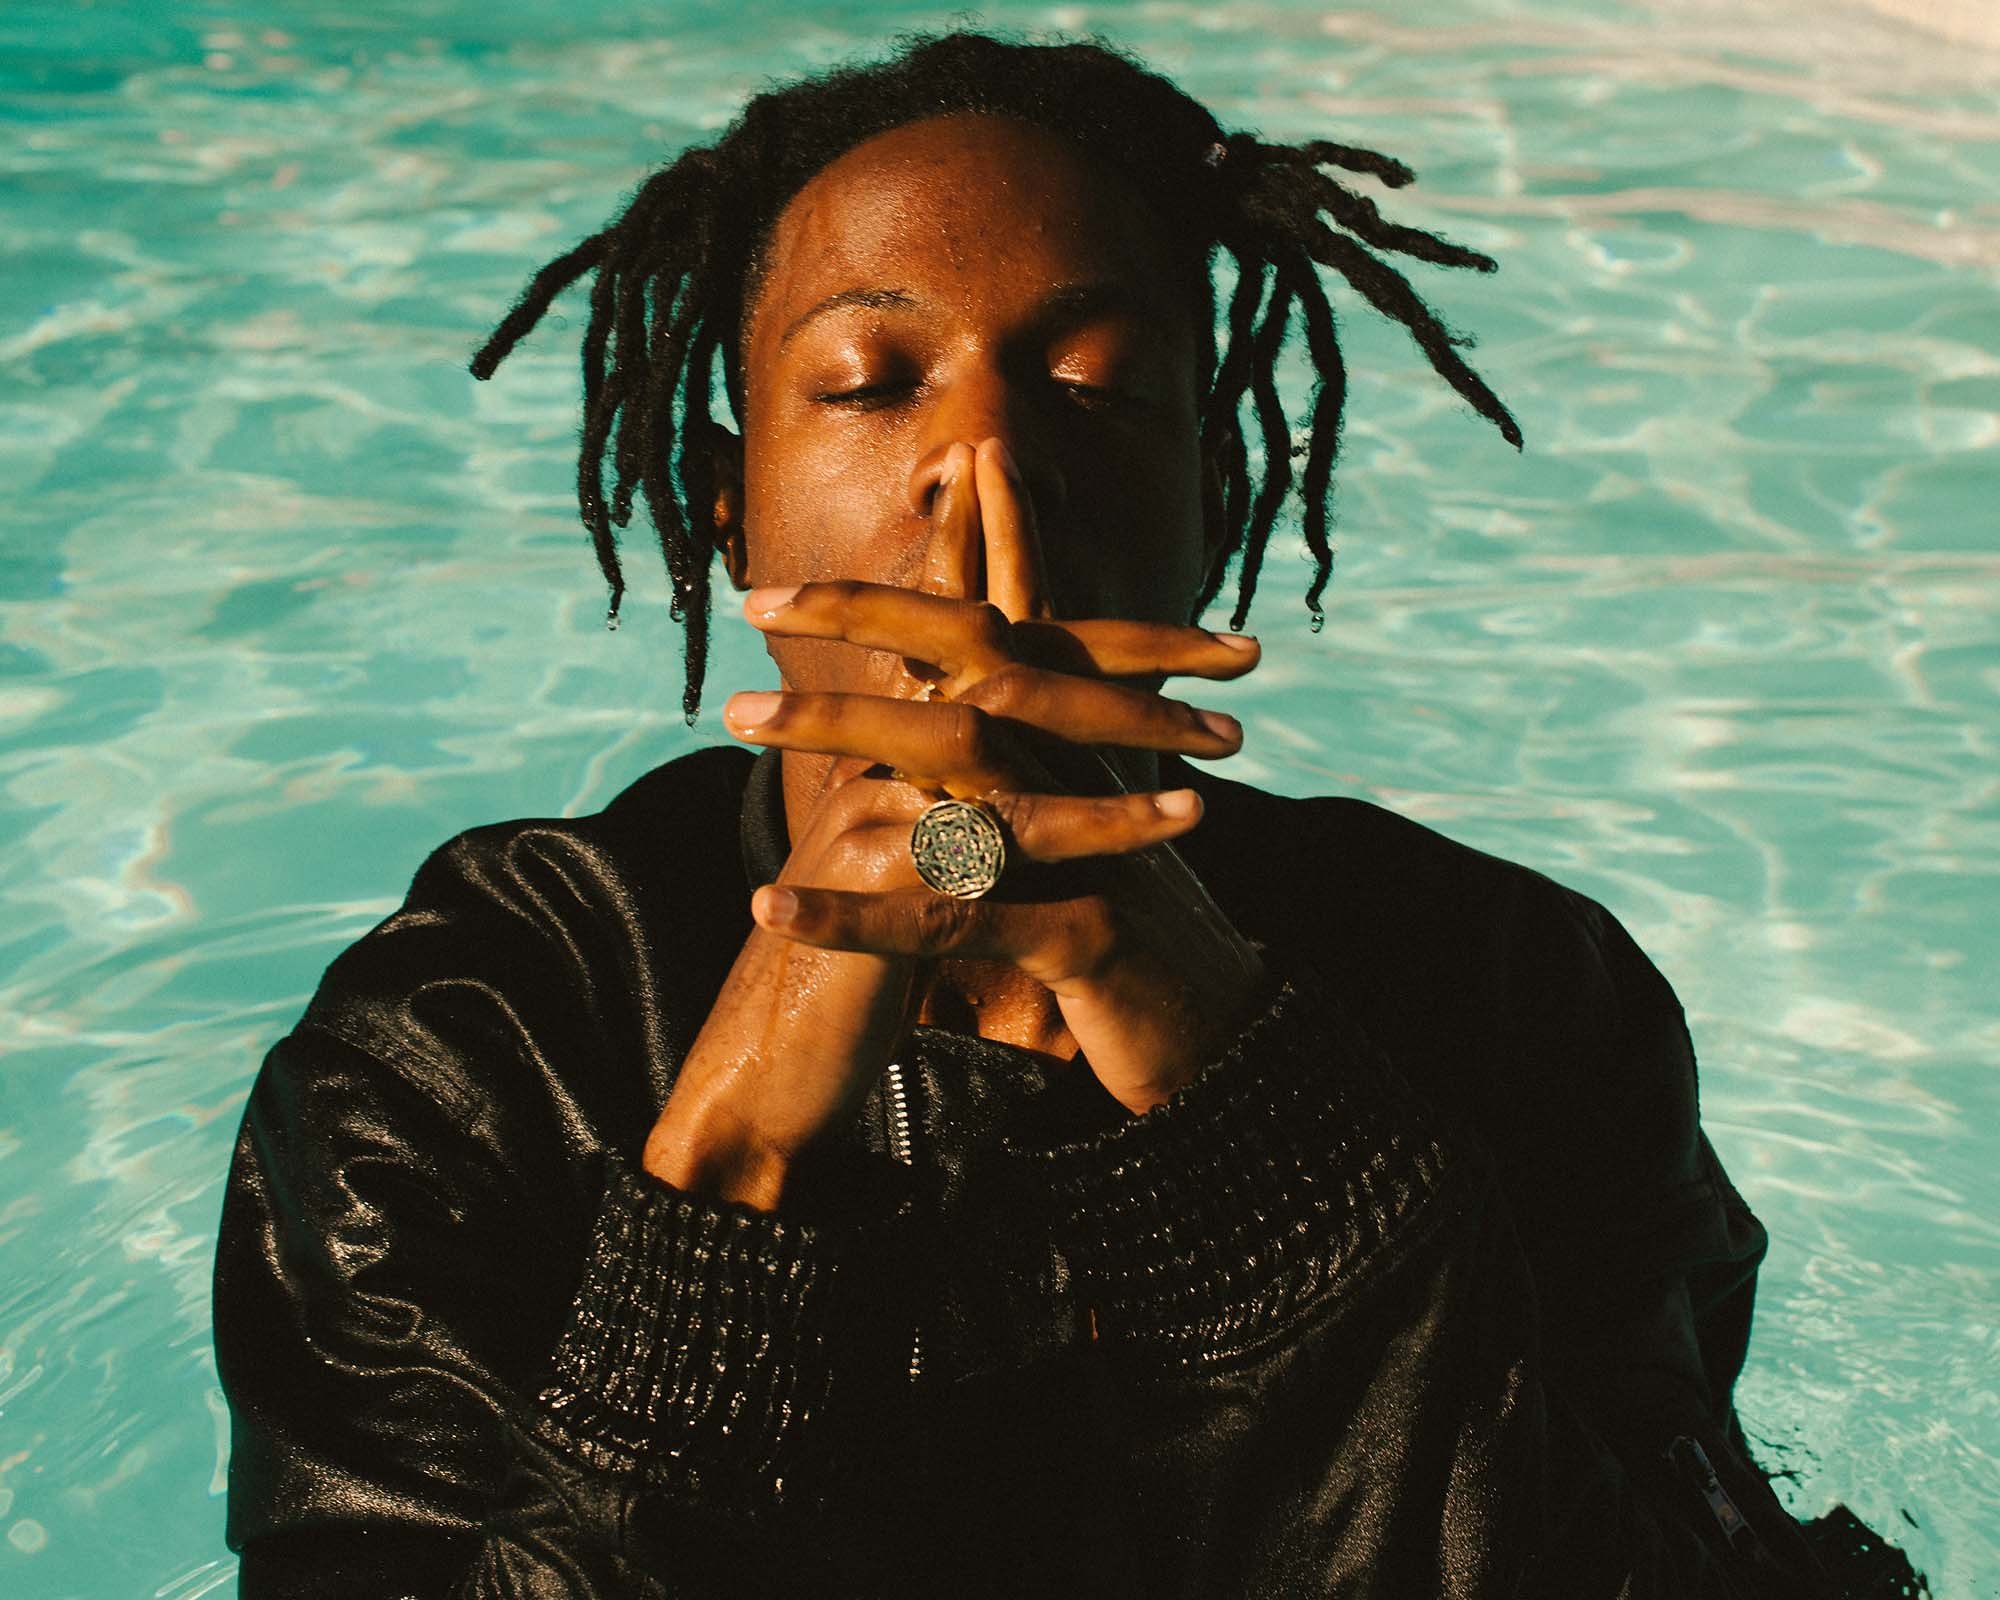 Joey Bada$$$ sits down with Vogue